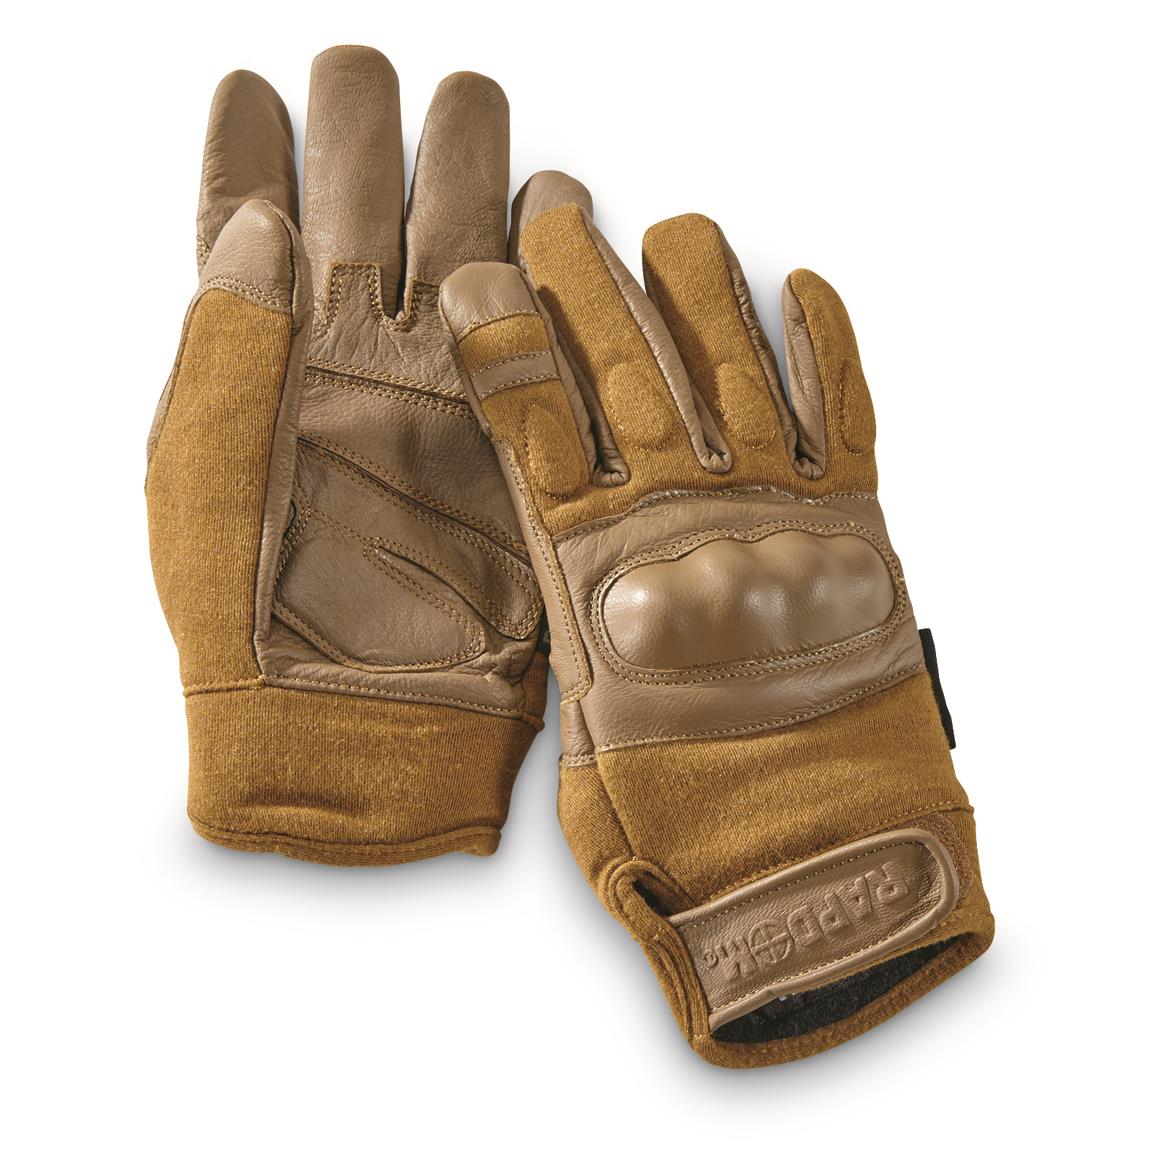 Rapid Dominance Nomex Tactical Gloves, Coyote